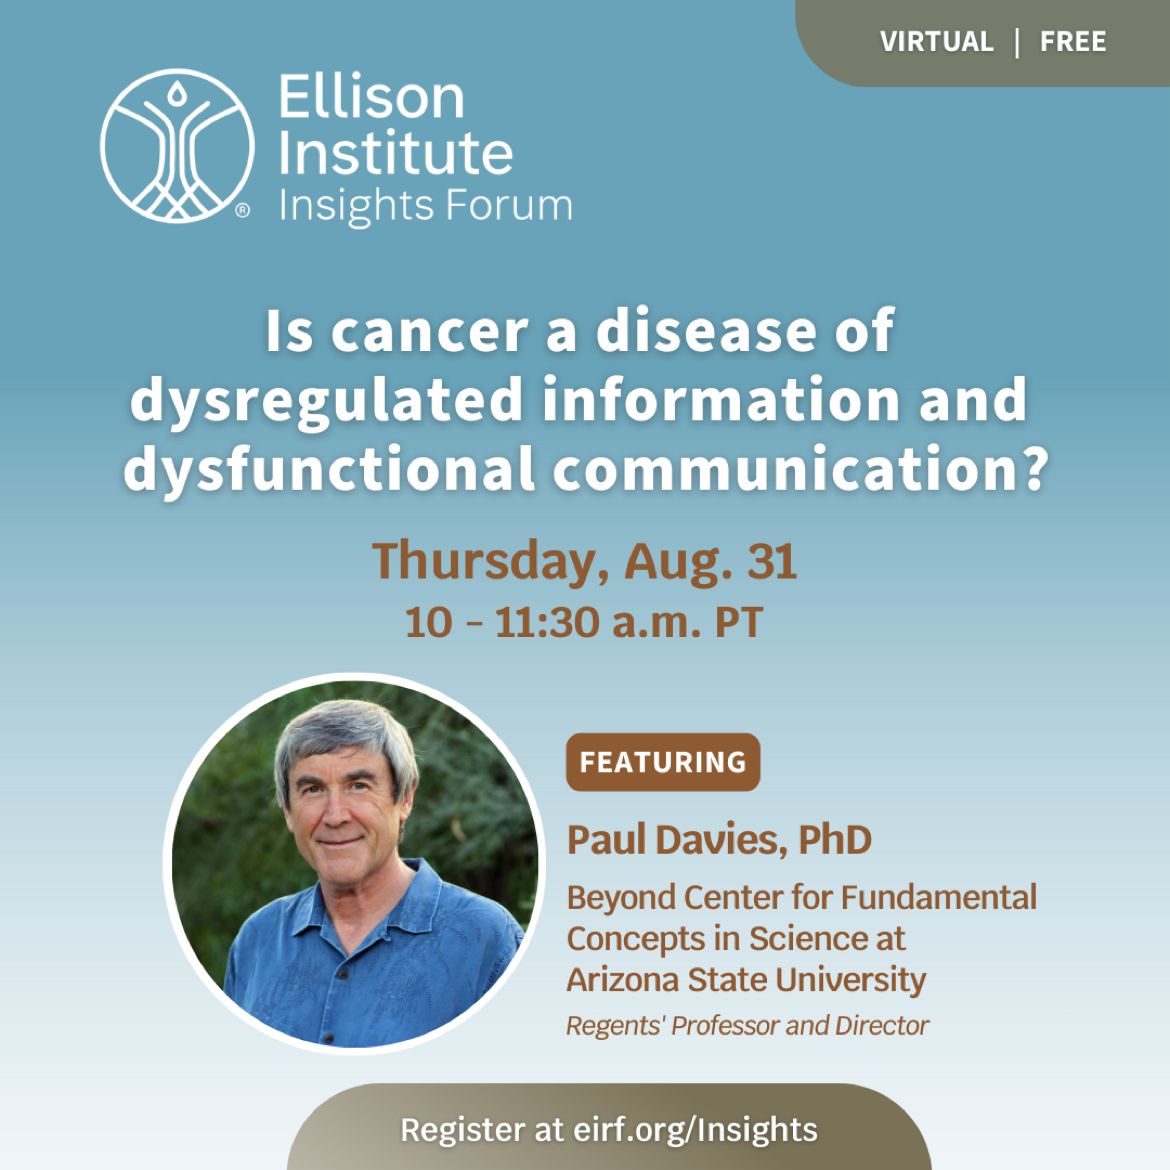 Is cancer a disease of dysregulated information and dysfunctional communication flyer. Even is hosted Thursday, August 31st at 10-11:30AM.